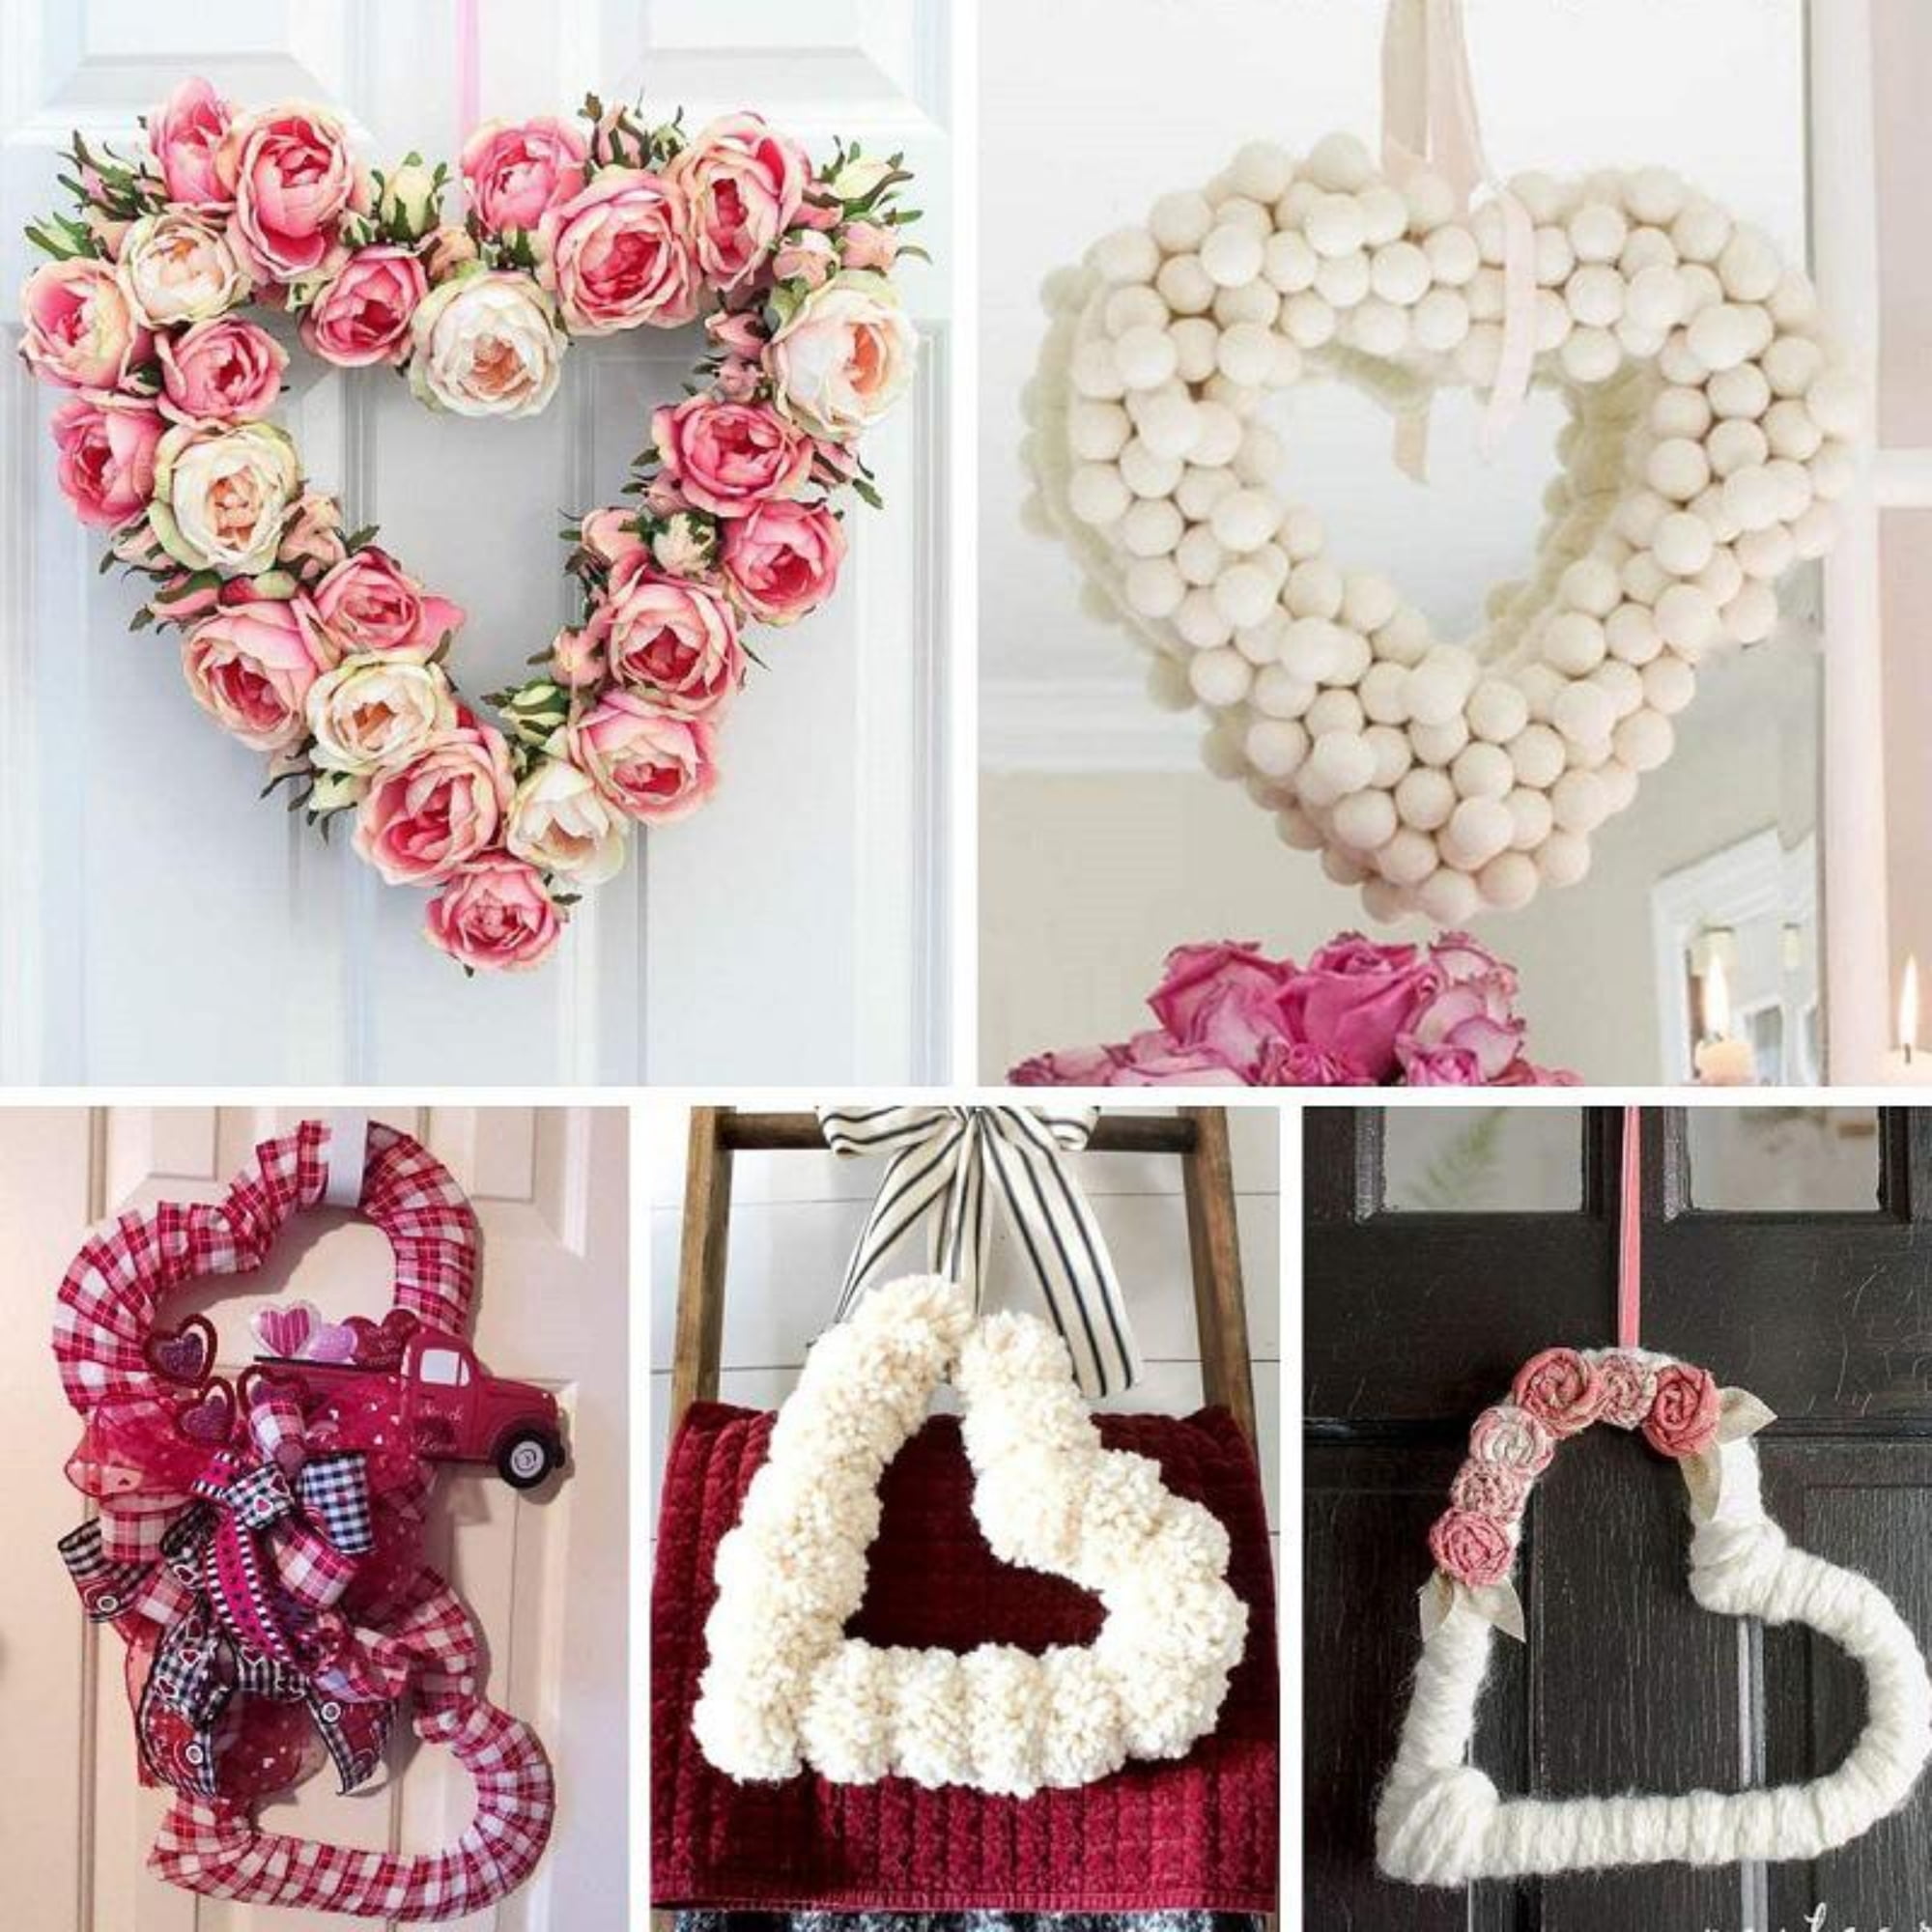  LAHONI 2 Pieces 12 Inch Wreath Frame, Heart Shaped